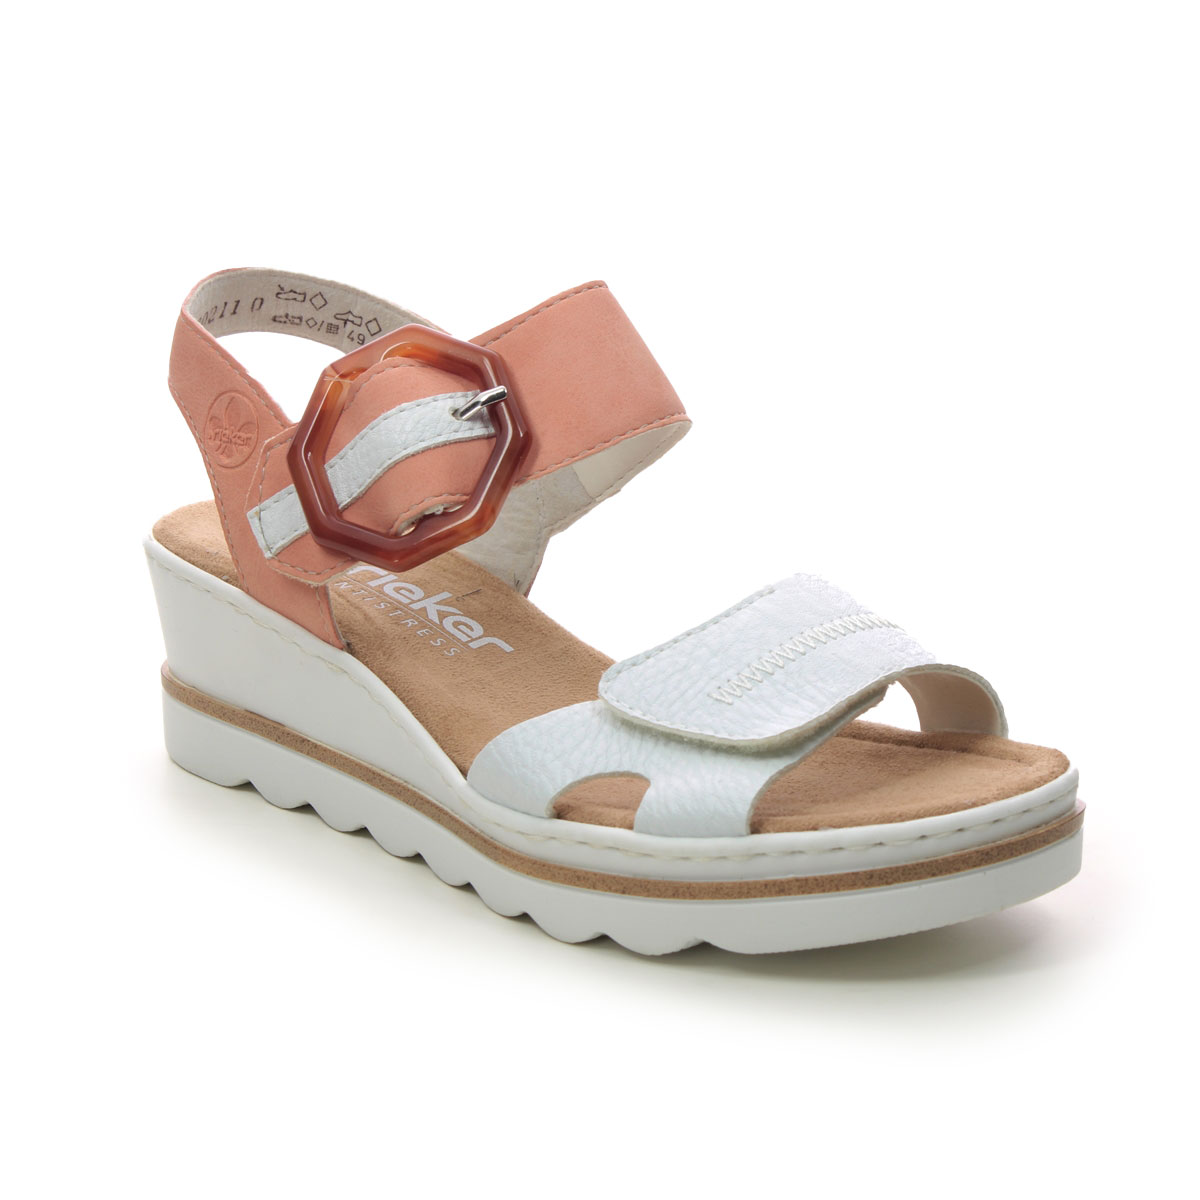 Rieker 67476-38 White Coral Womens Wedge Sandals in a Plain Man-made in Size 41